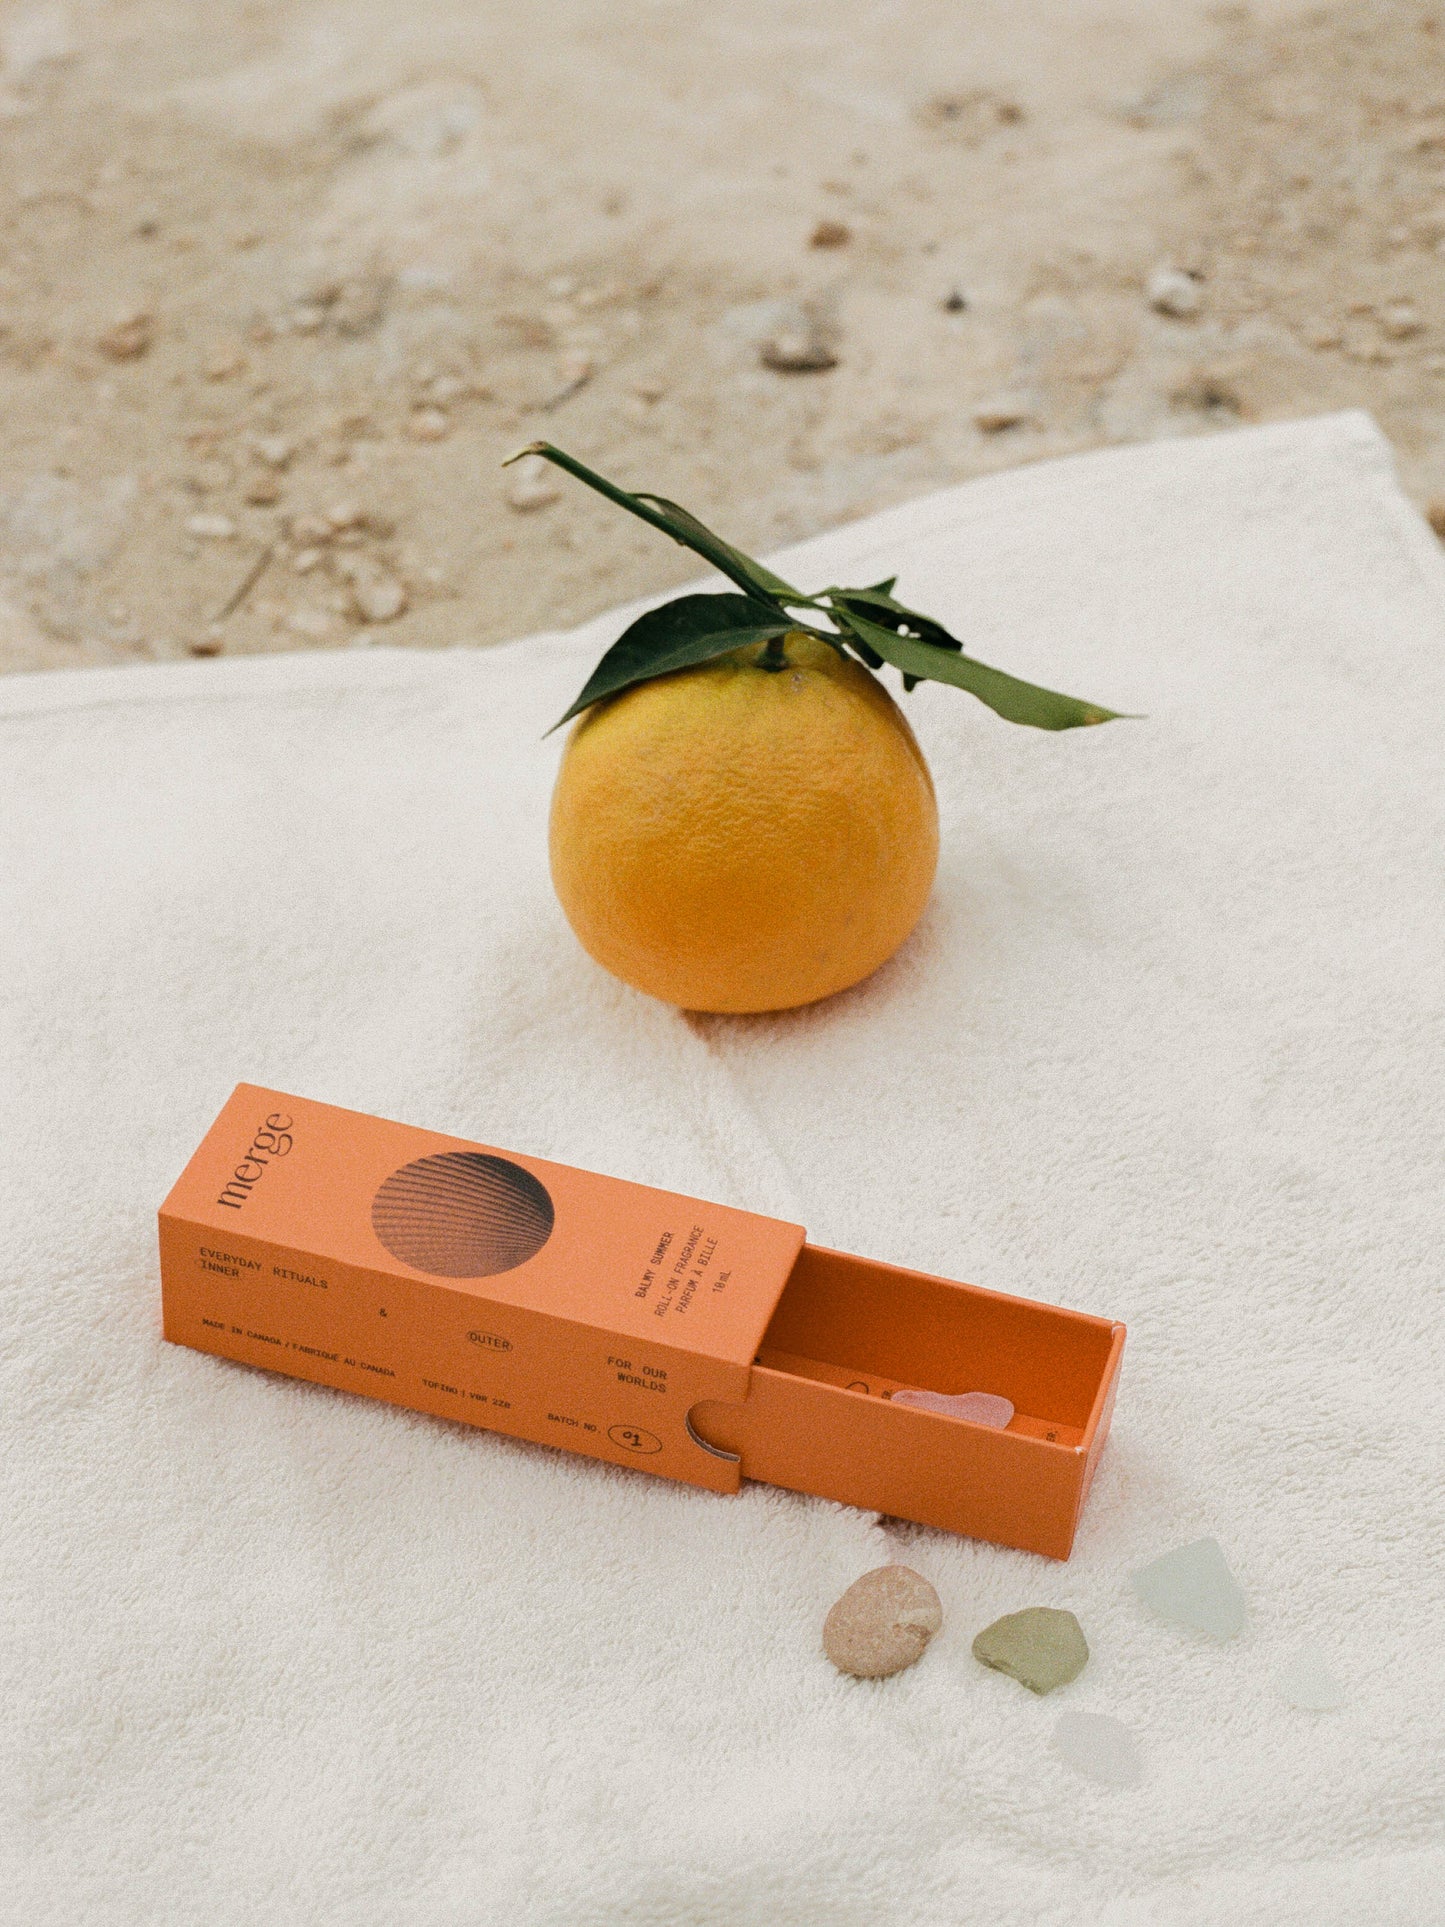 Balmy Summer roller-on fragrance by Merge